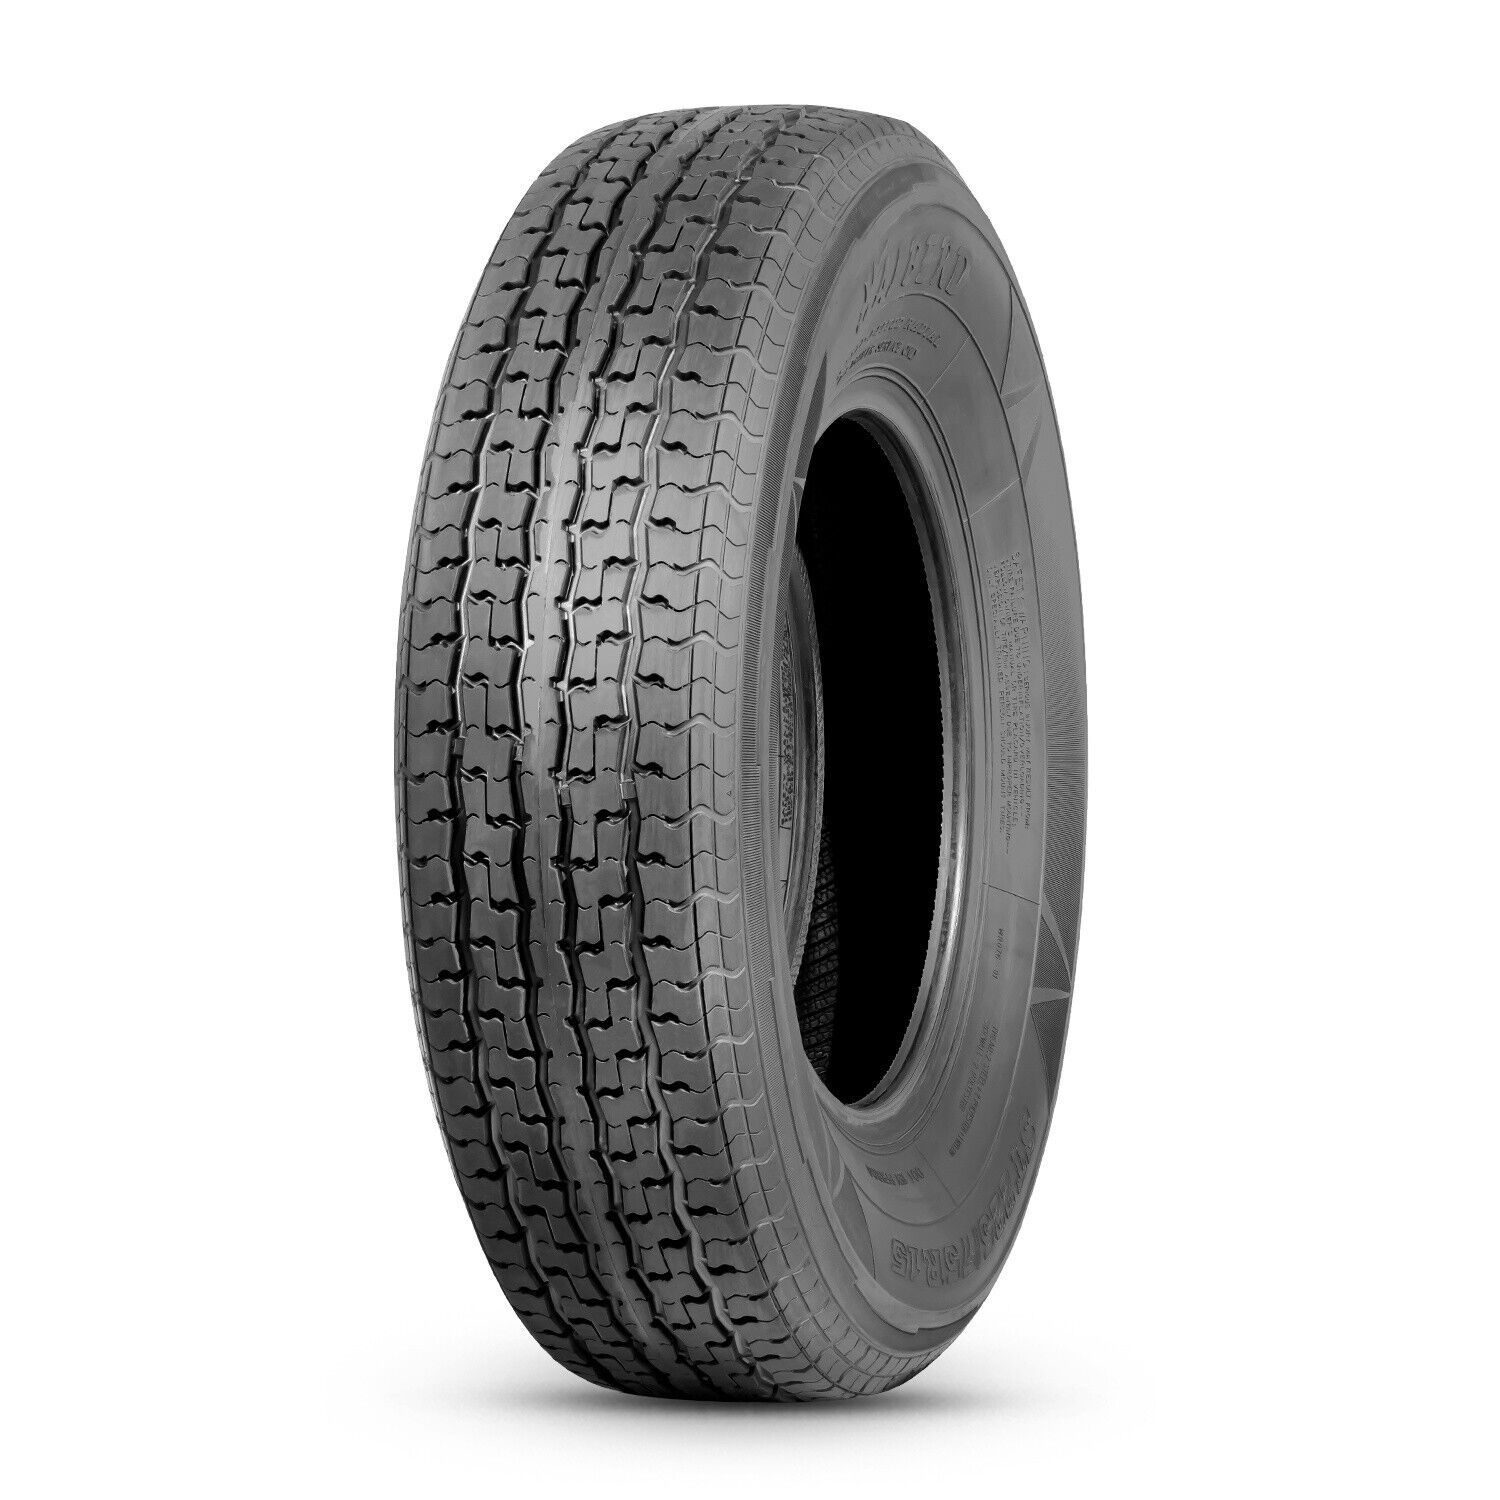 ST225/75R15 Trailer Tire 10PR 225 75 15 Replacement Tyres Load Range E Tubeless